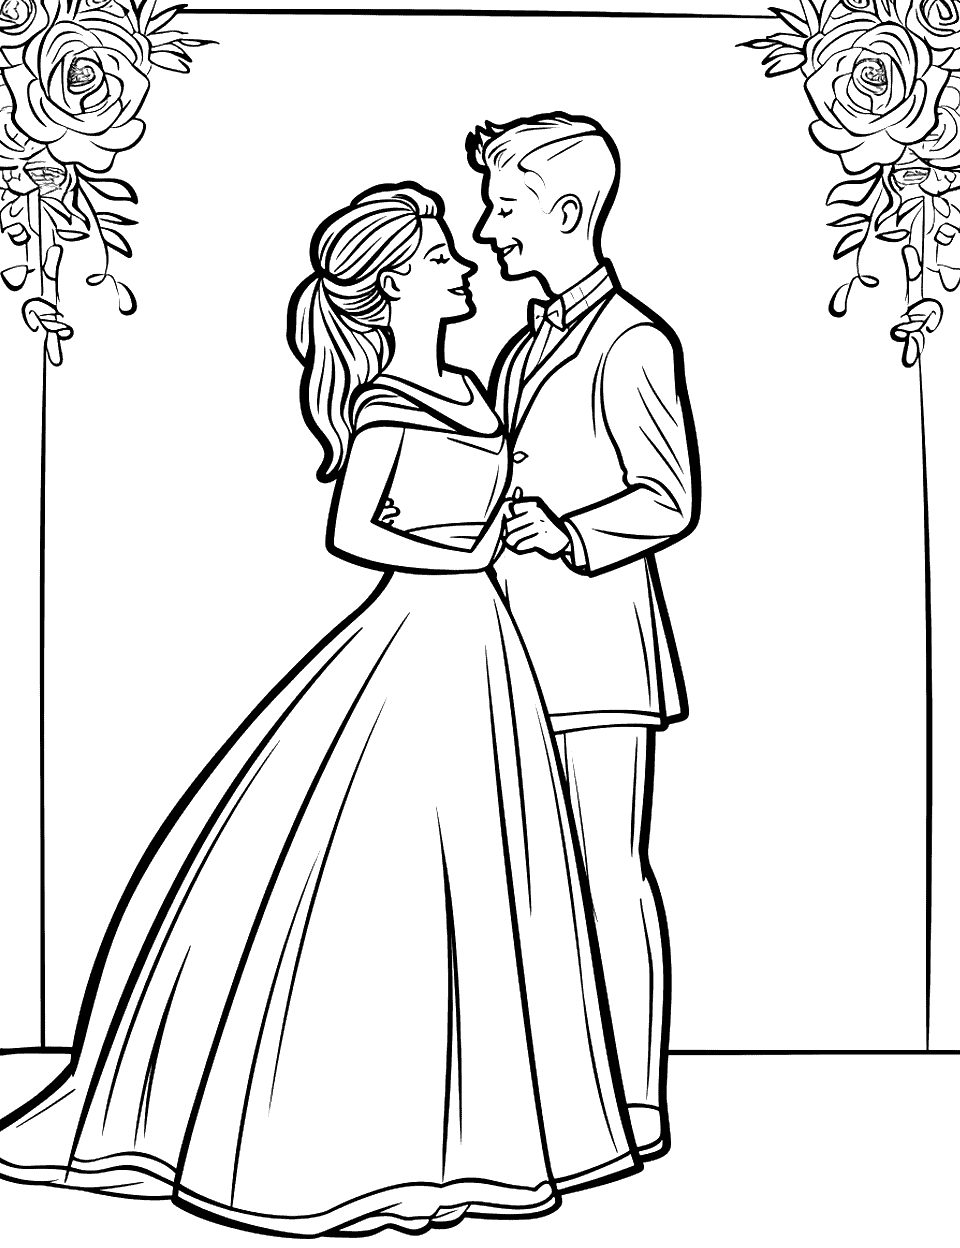 First Dance Wedding Coloring Page - A bride and groom sharing their first dance.